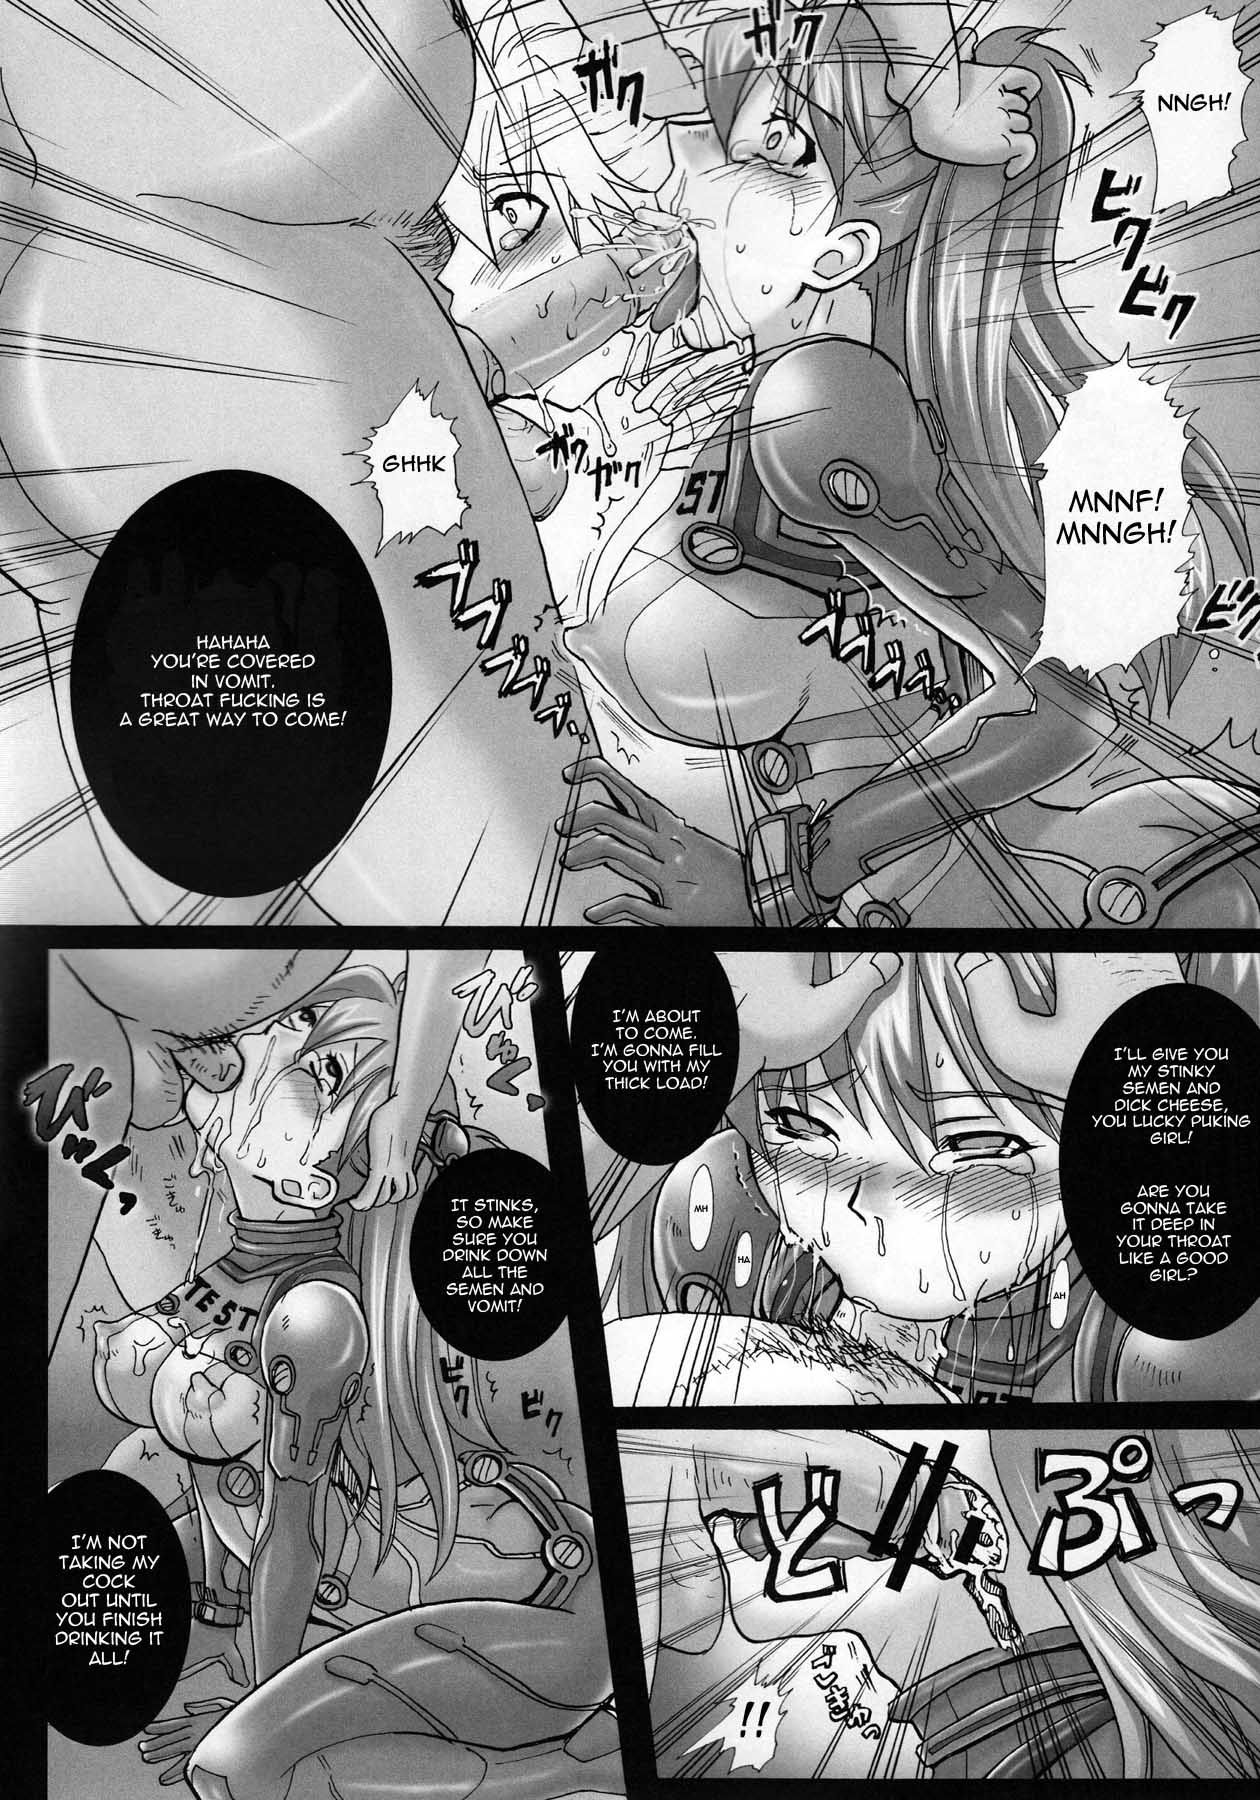 [Modaetei+Abalone Soft] Slave Suit and Fuck Toy (Neon Genesis Evangelion)[English][Little White Butterflies] page 10 full